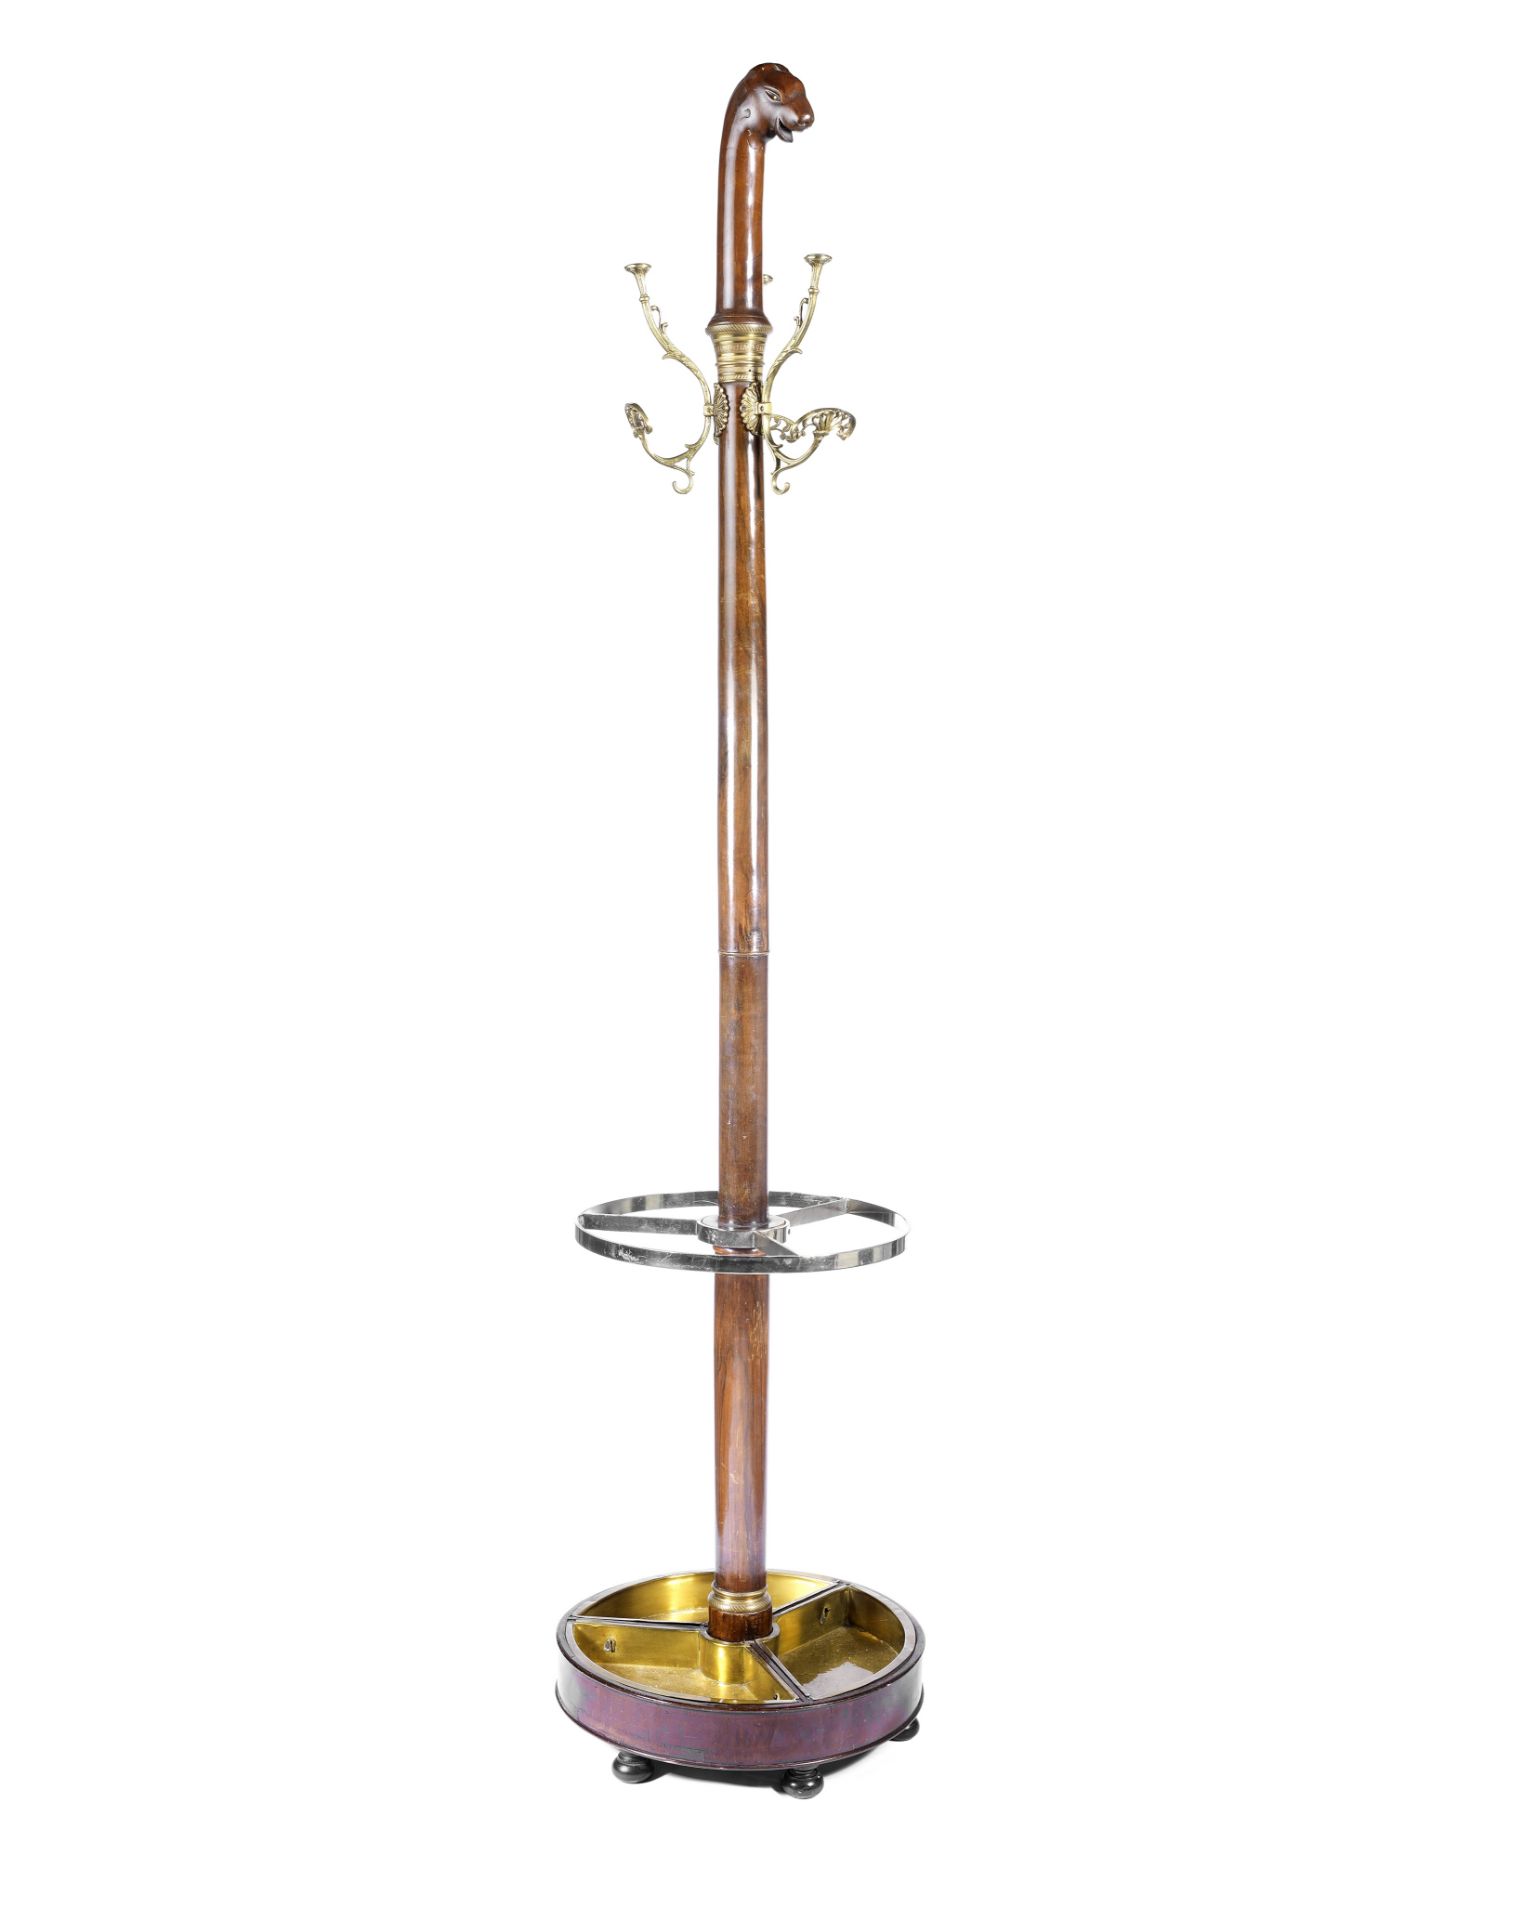 A late 19th century / early 20th century Empire revival mahogany and gilt brass hat stand - Image 2 of 2